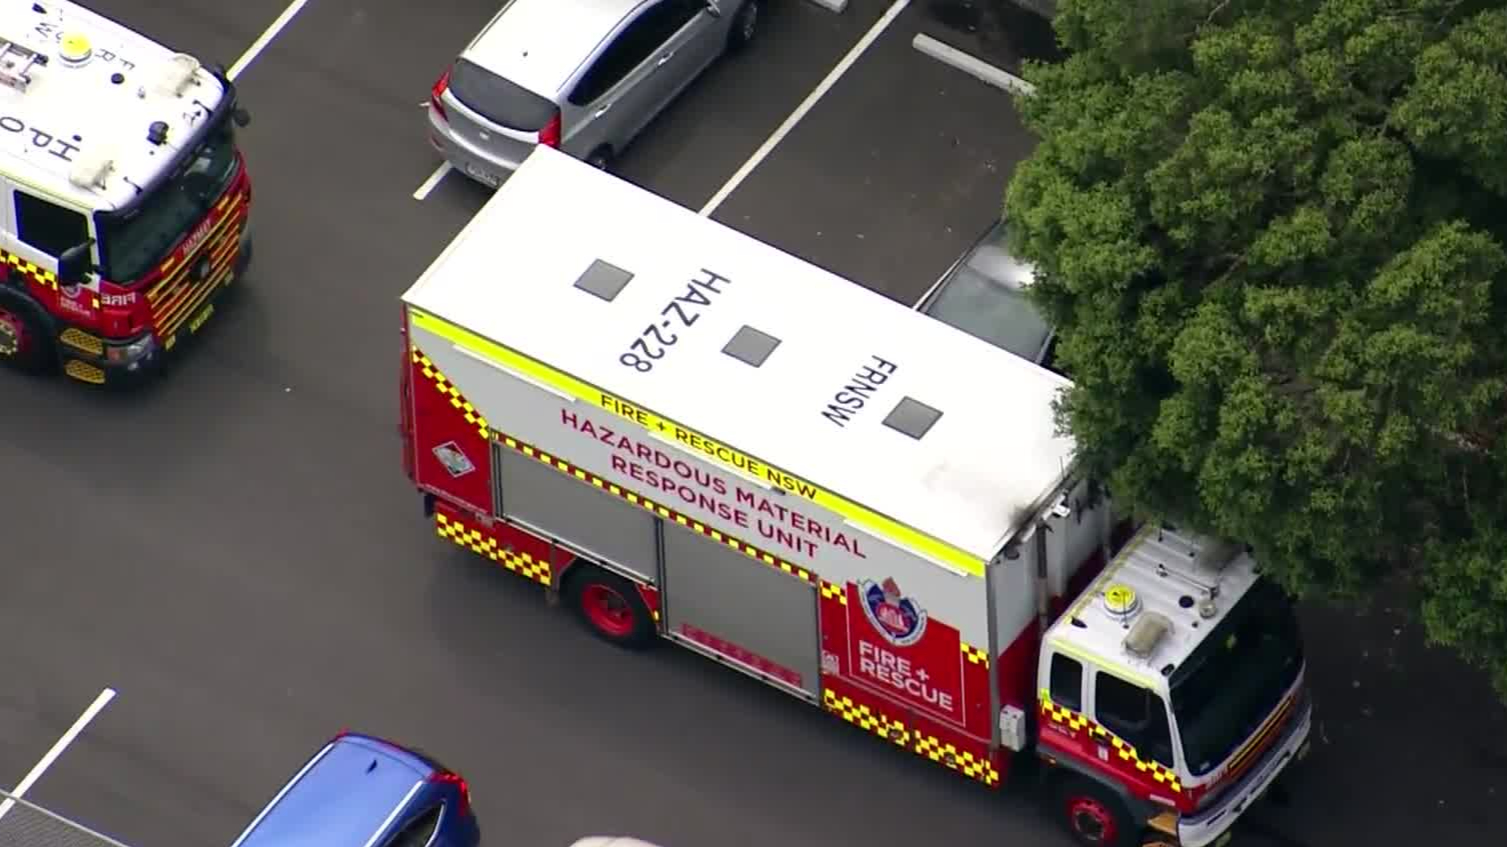 Dozens left feeling ‘unwell’ after chemical spill at boys school